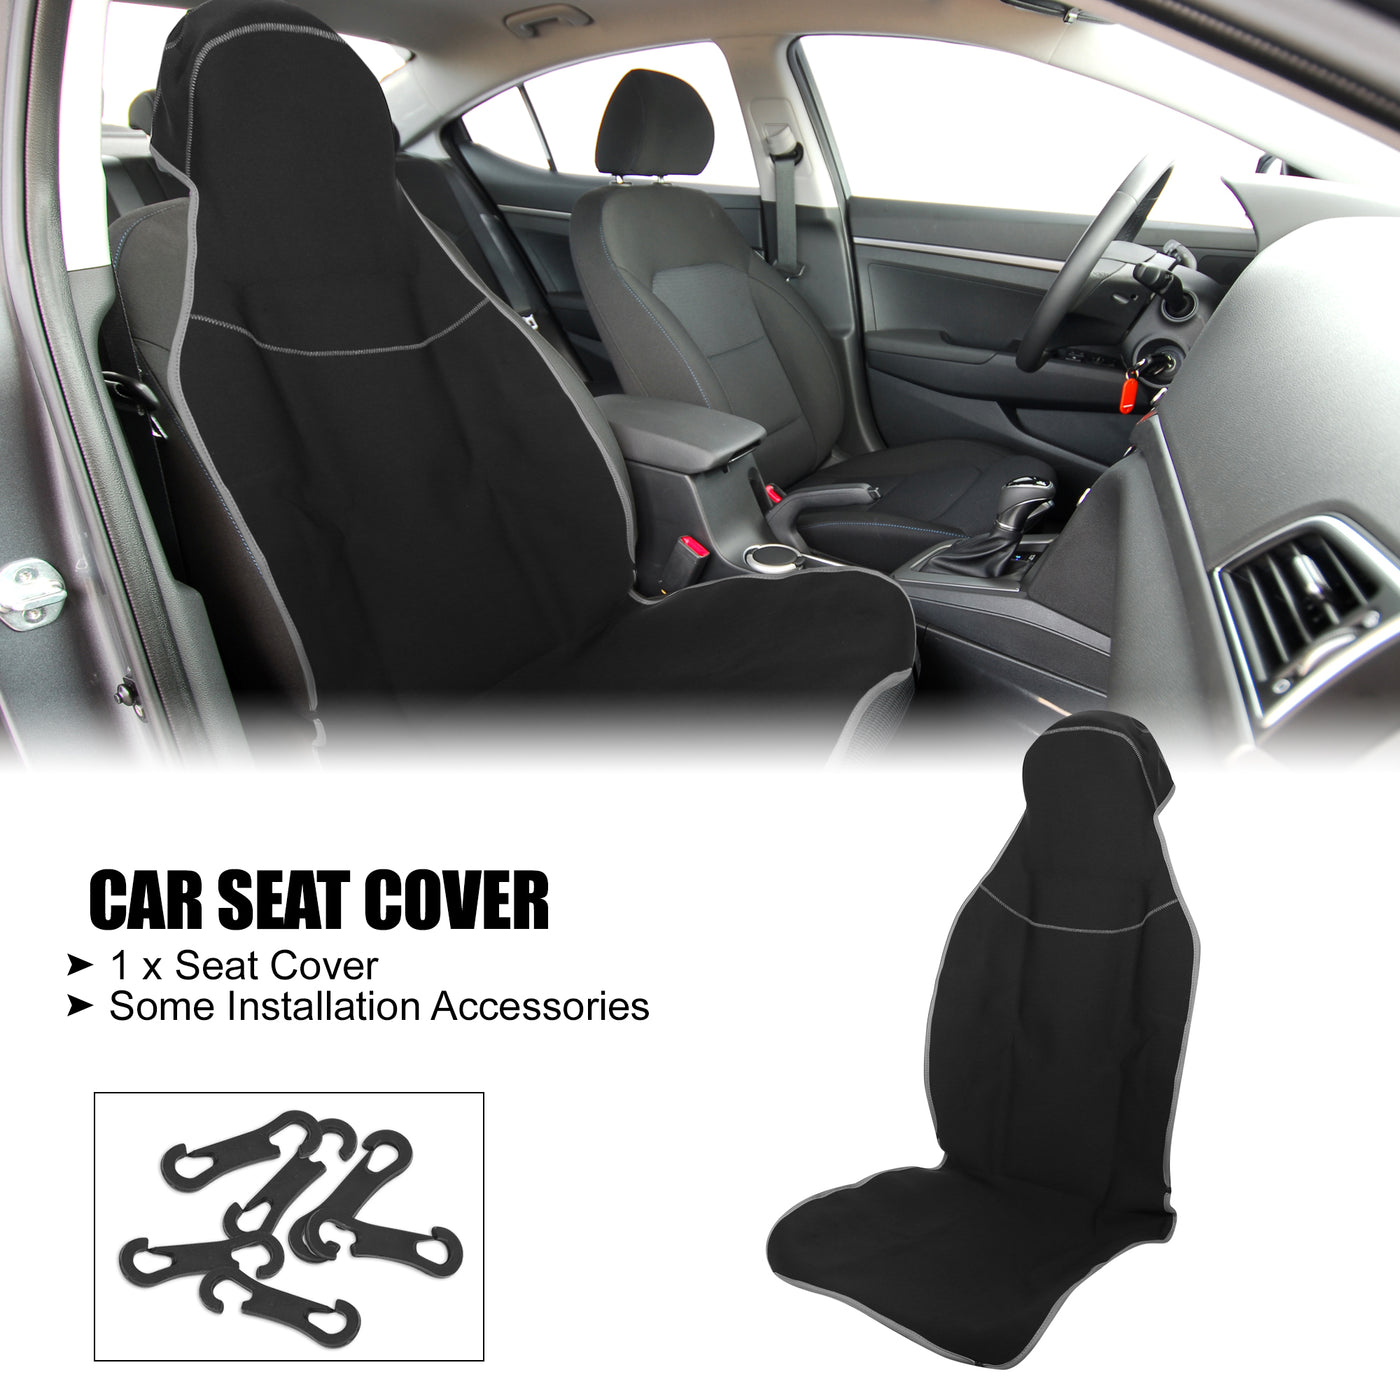 X AUTOHAUX Universal Interior Car Seat Covers Durable Washable Flat Padding Neoprene Car Seat Covers Fit for Cars Trucks and SUVs Gray